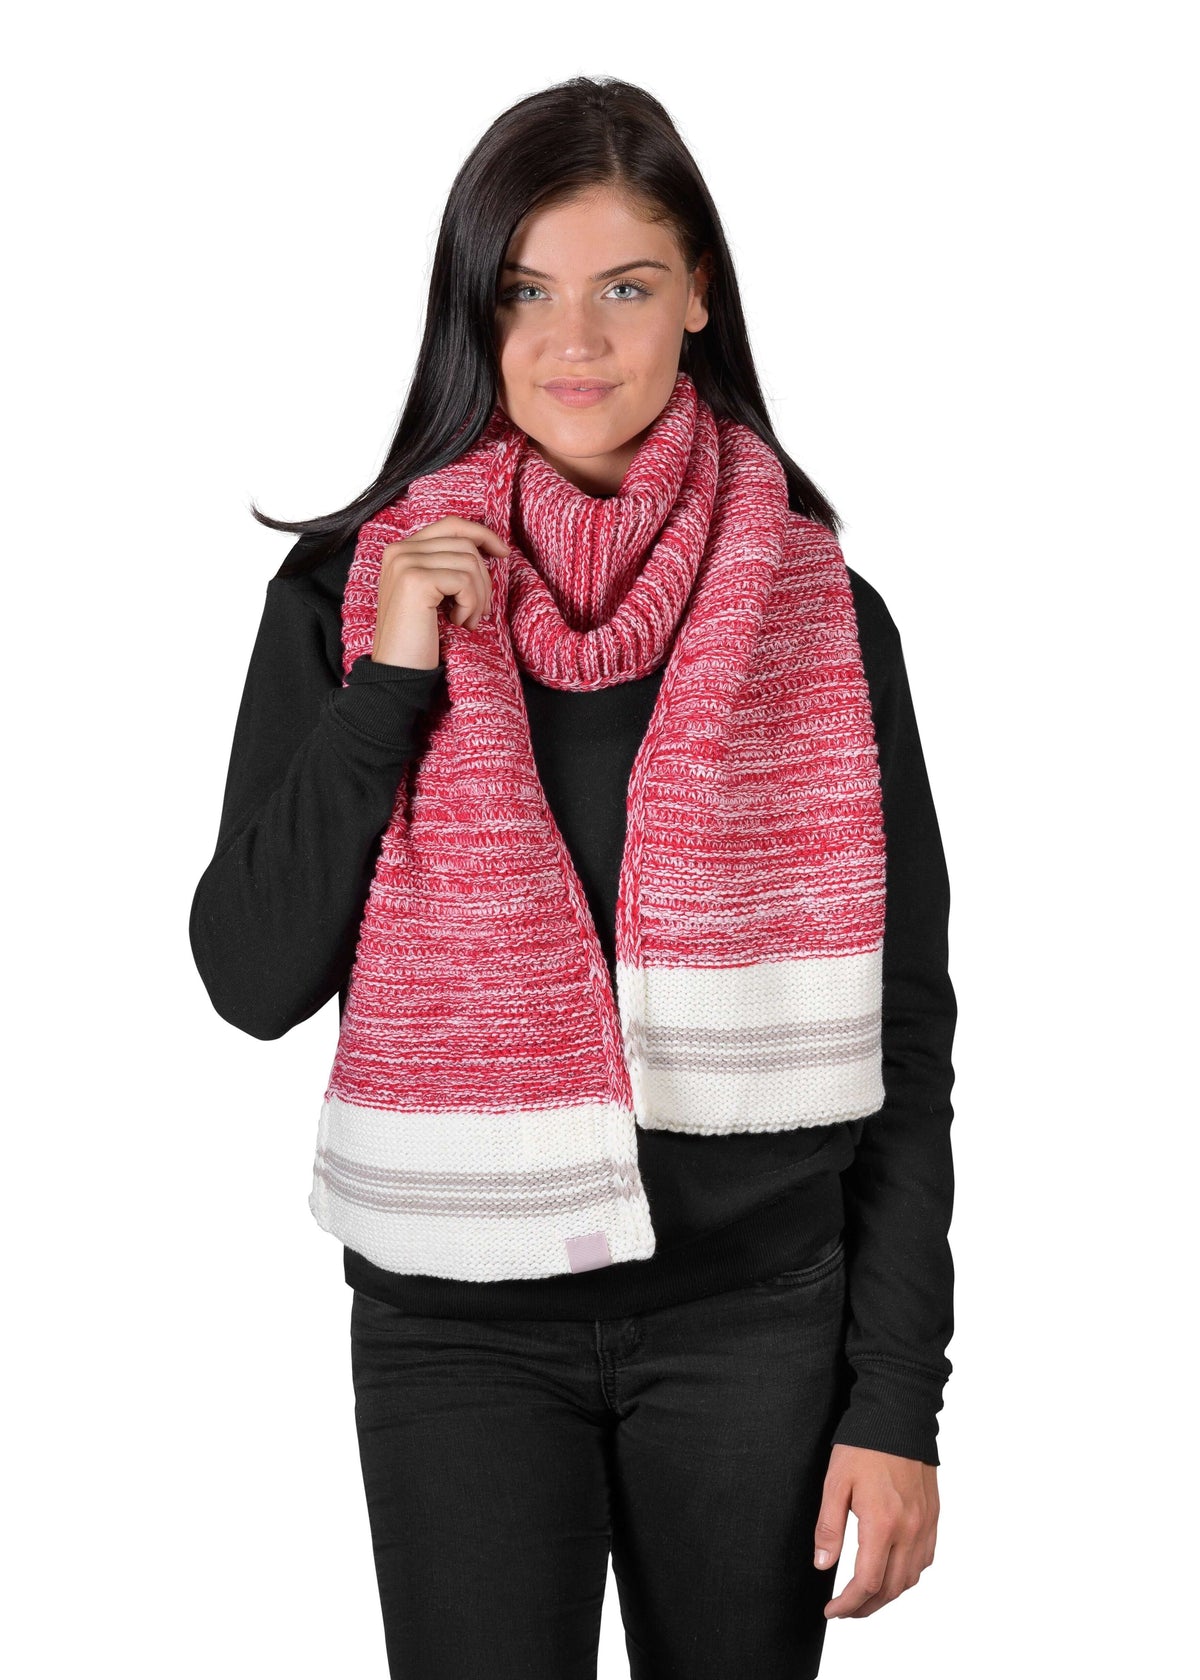 Canadiana Knit Scarf - Deep Red - LATTELOVE Co.